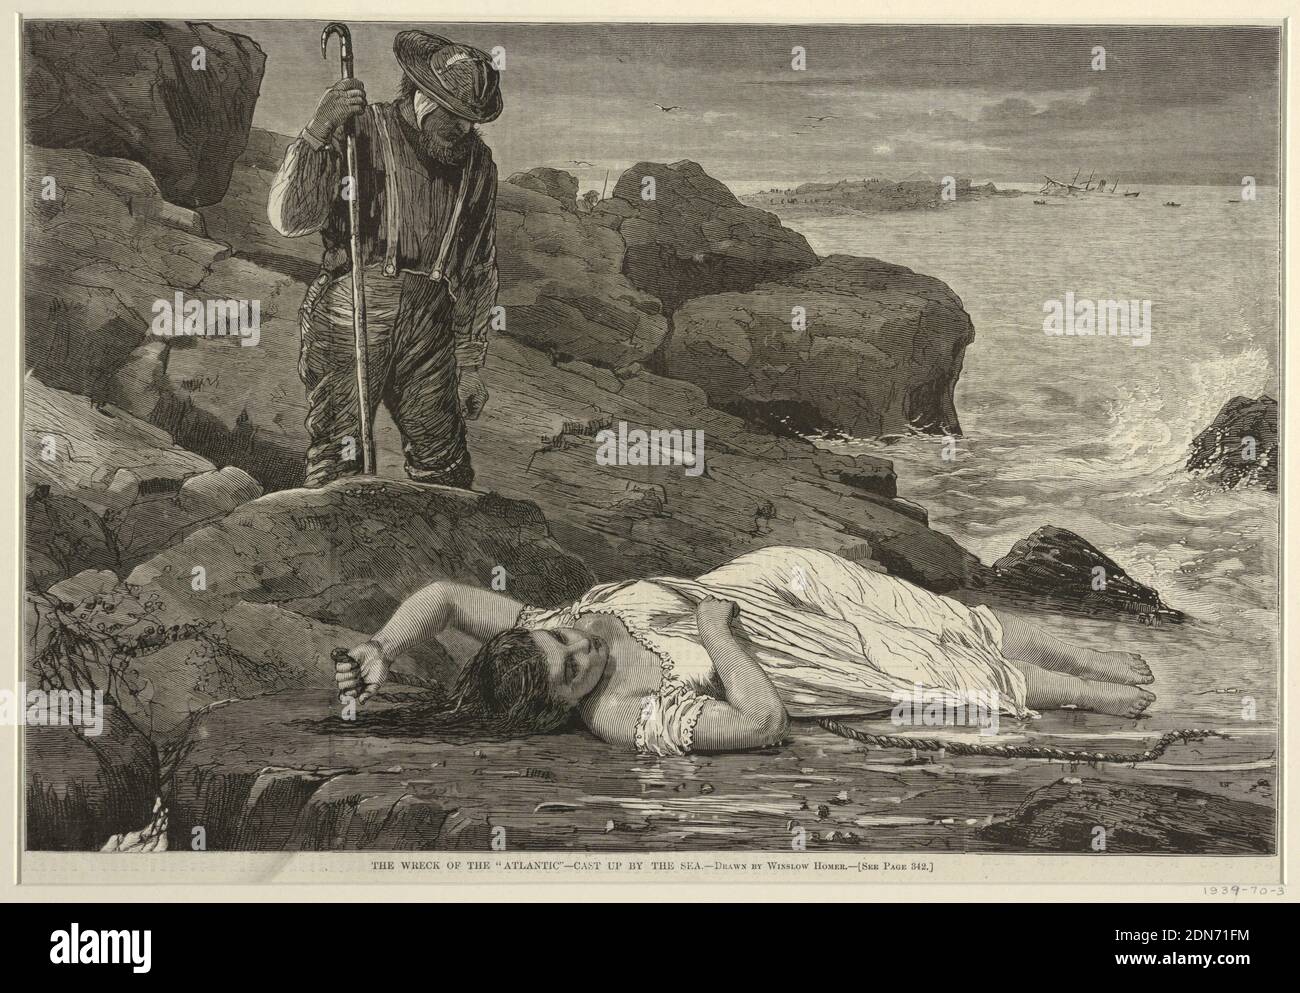 The Wreck of the 'Atlantic' – Cast up by the Sea, Winslow Homer, American, 1836–1910, Wood engraving printed in black ink on paper, Horizontal view of rocky seacoast with boulders, with the figure of a woman in nightdress lying full length in the foreground, while beyond her, looking downward, is a man with a boathook, and in distance, at right, are a point of land with figures and foundered steamship., USA, April 26, 1873, graphic design, Print Stock Photo